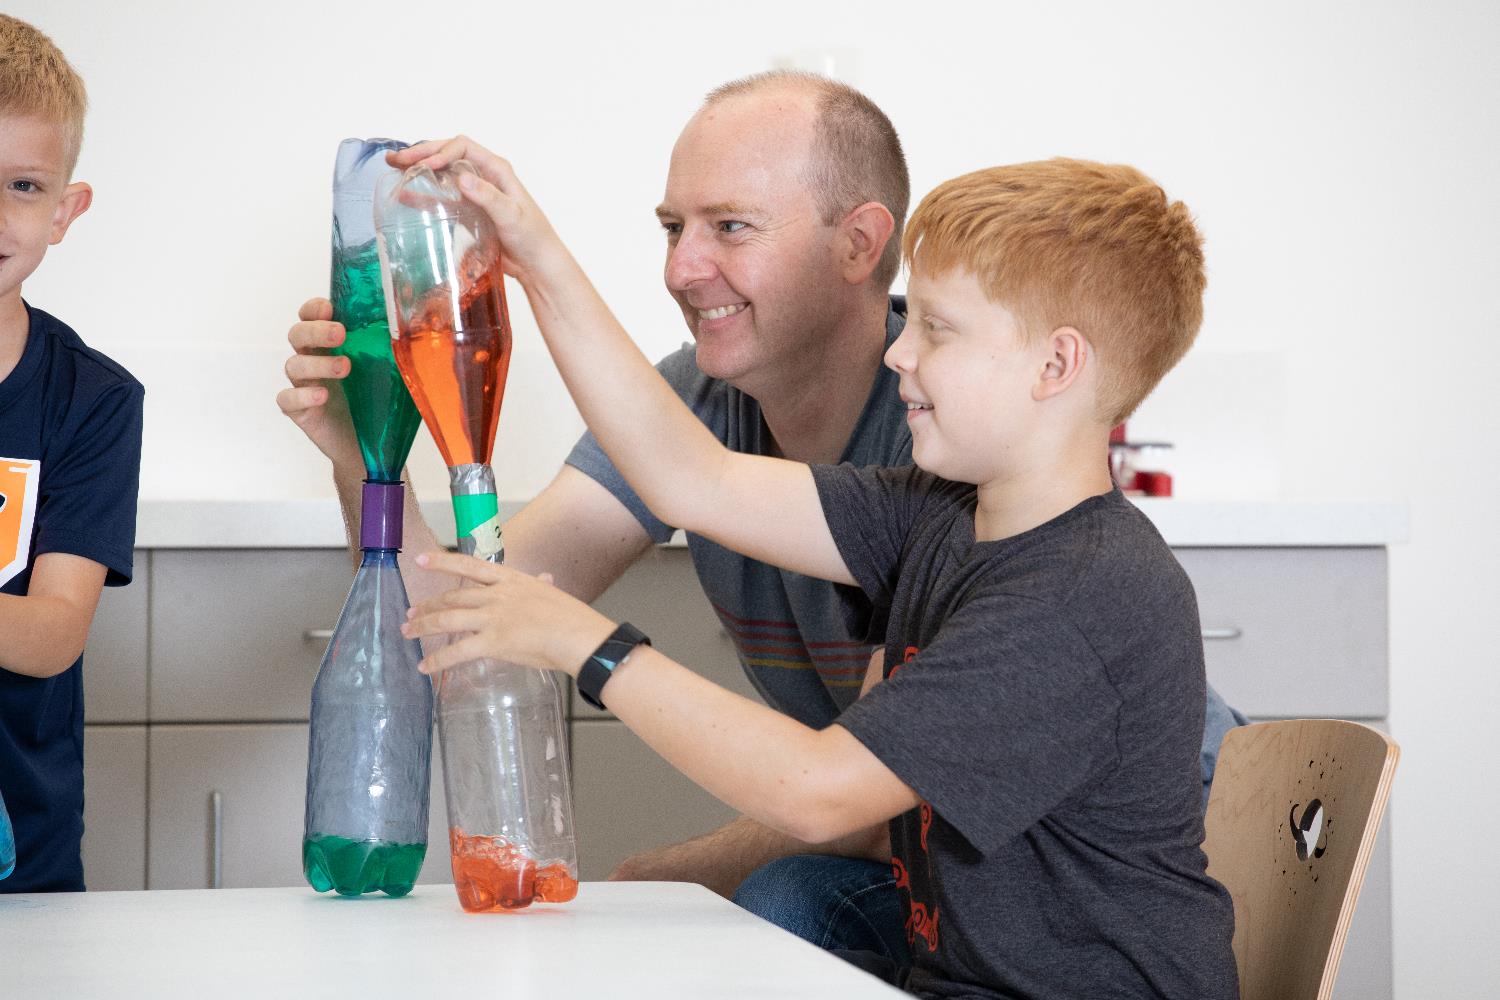 An instructor sits next to a child as they compare their science experiments